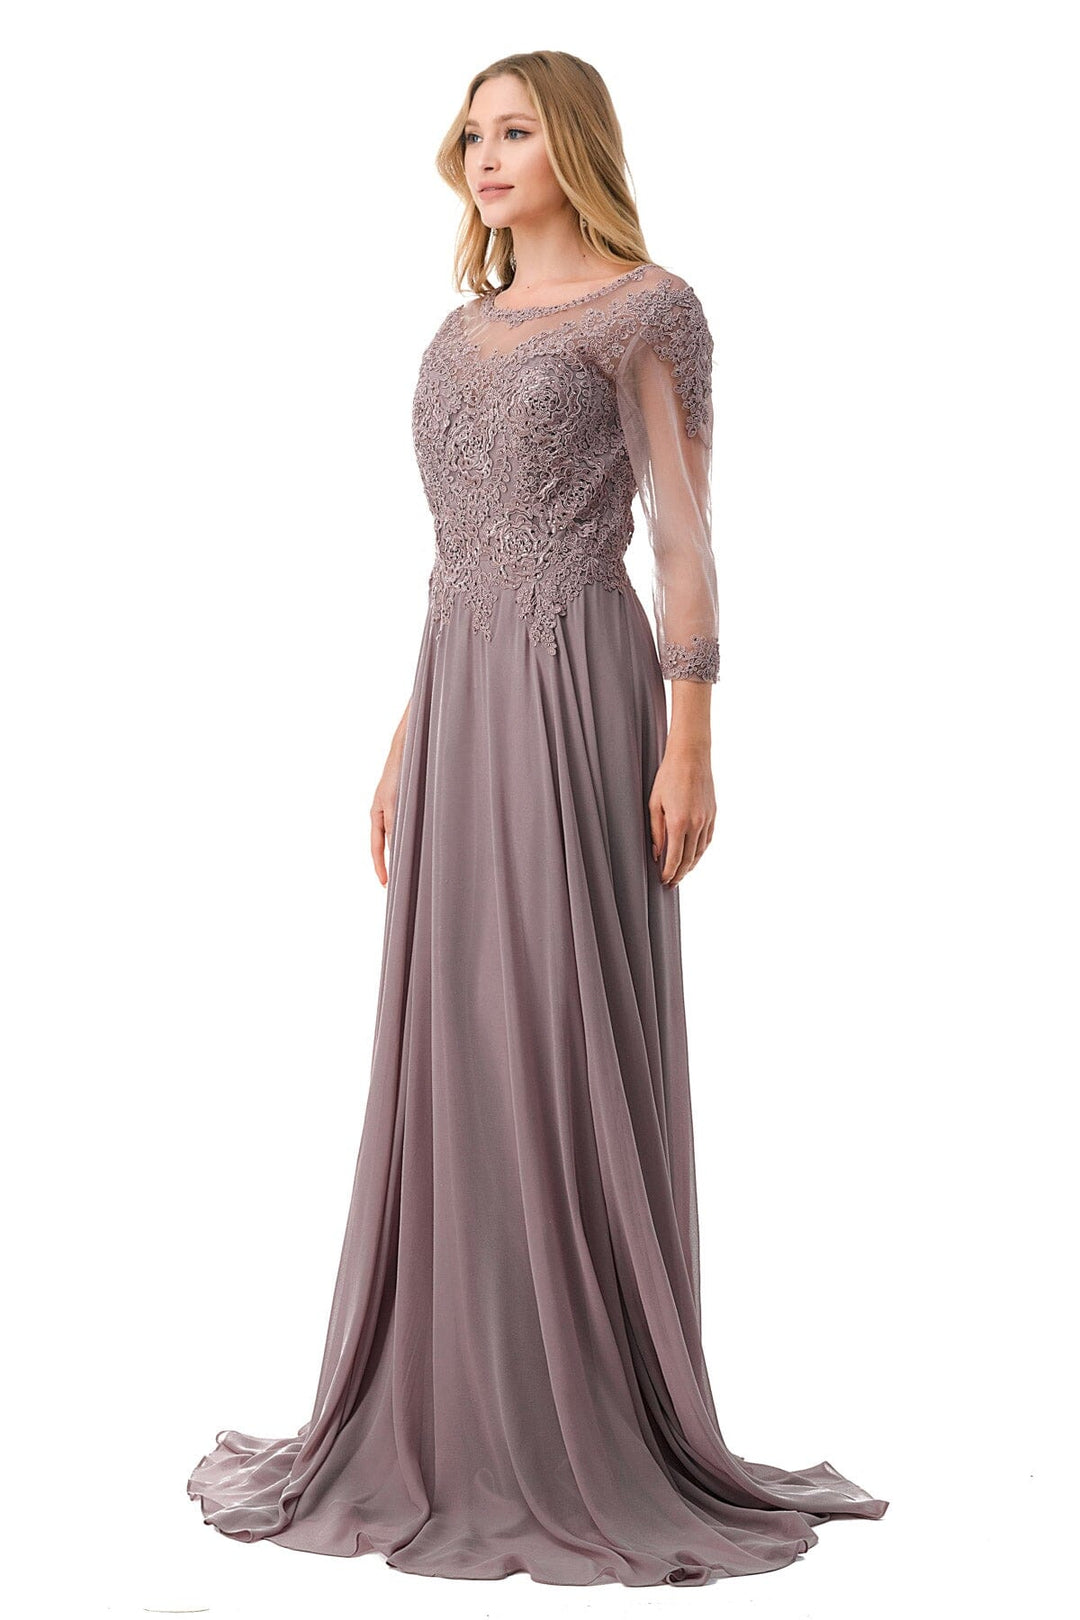 Lace Applique 3/4 Sleeve Gown by Coya M2723J